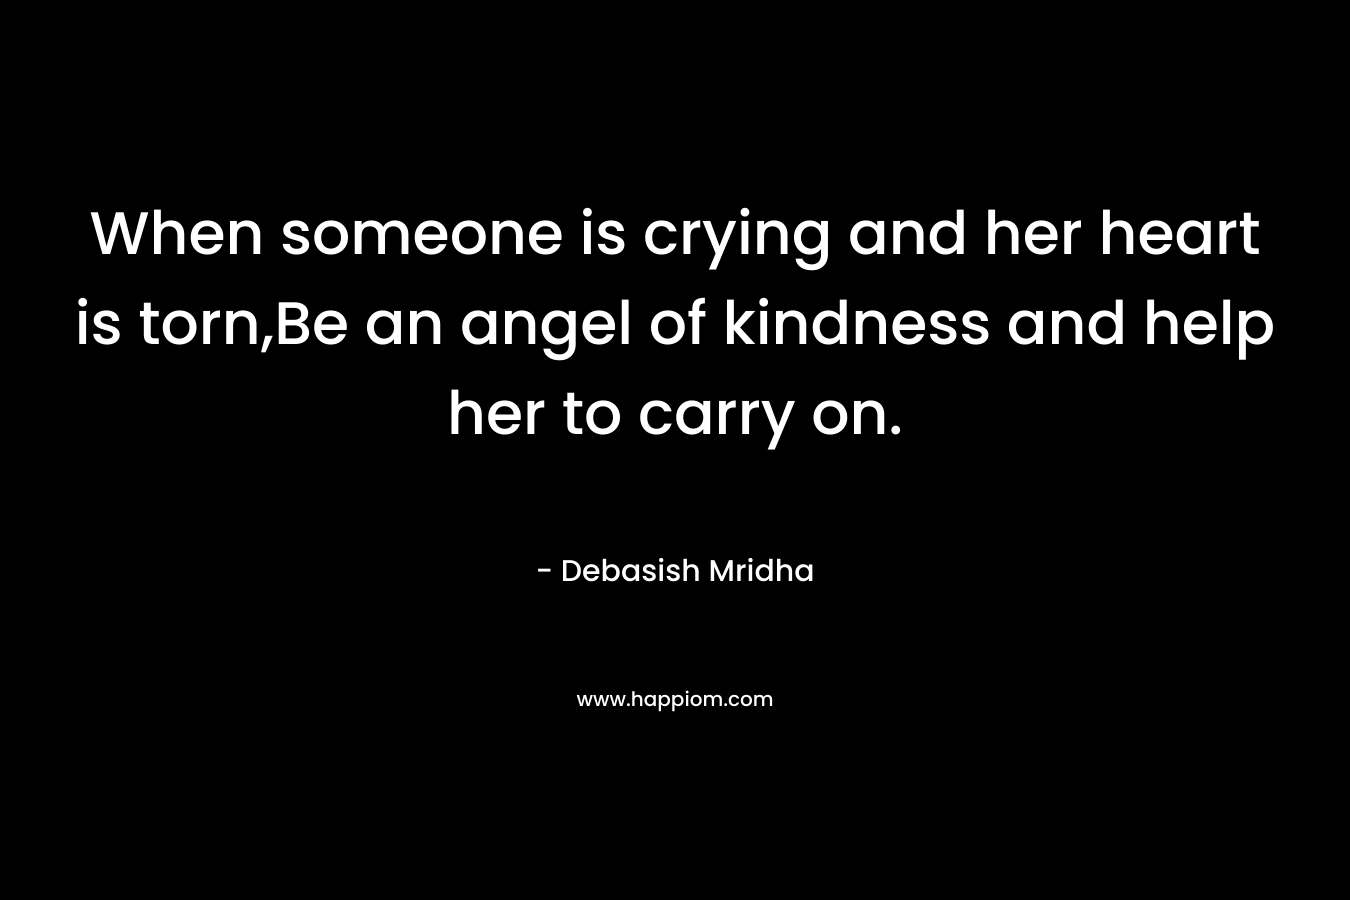 When someone is crying and her heart is torn,Be an angel of kindness and help her to carry on.